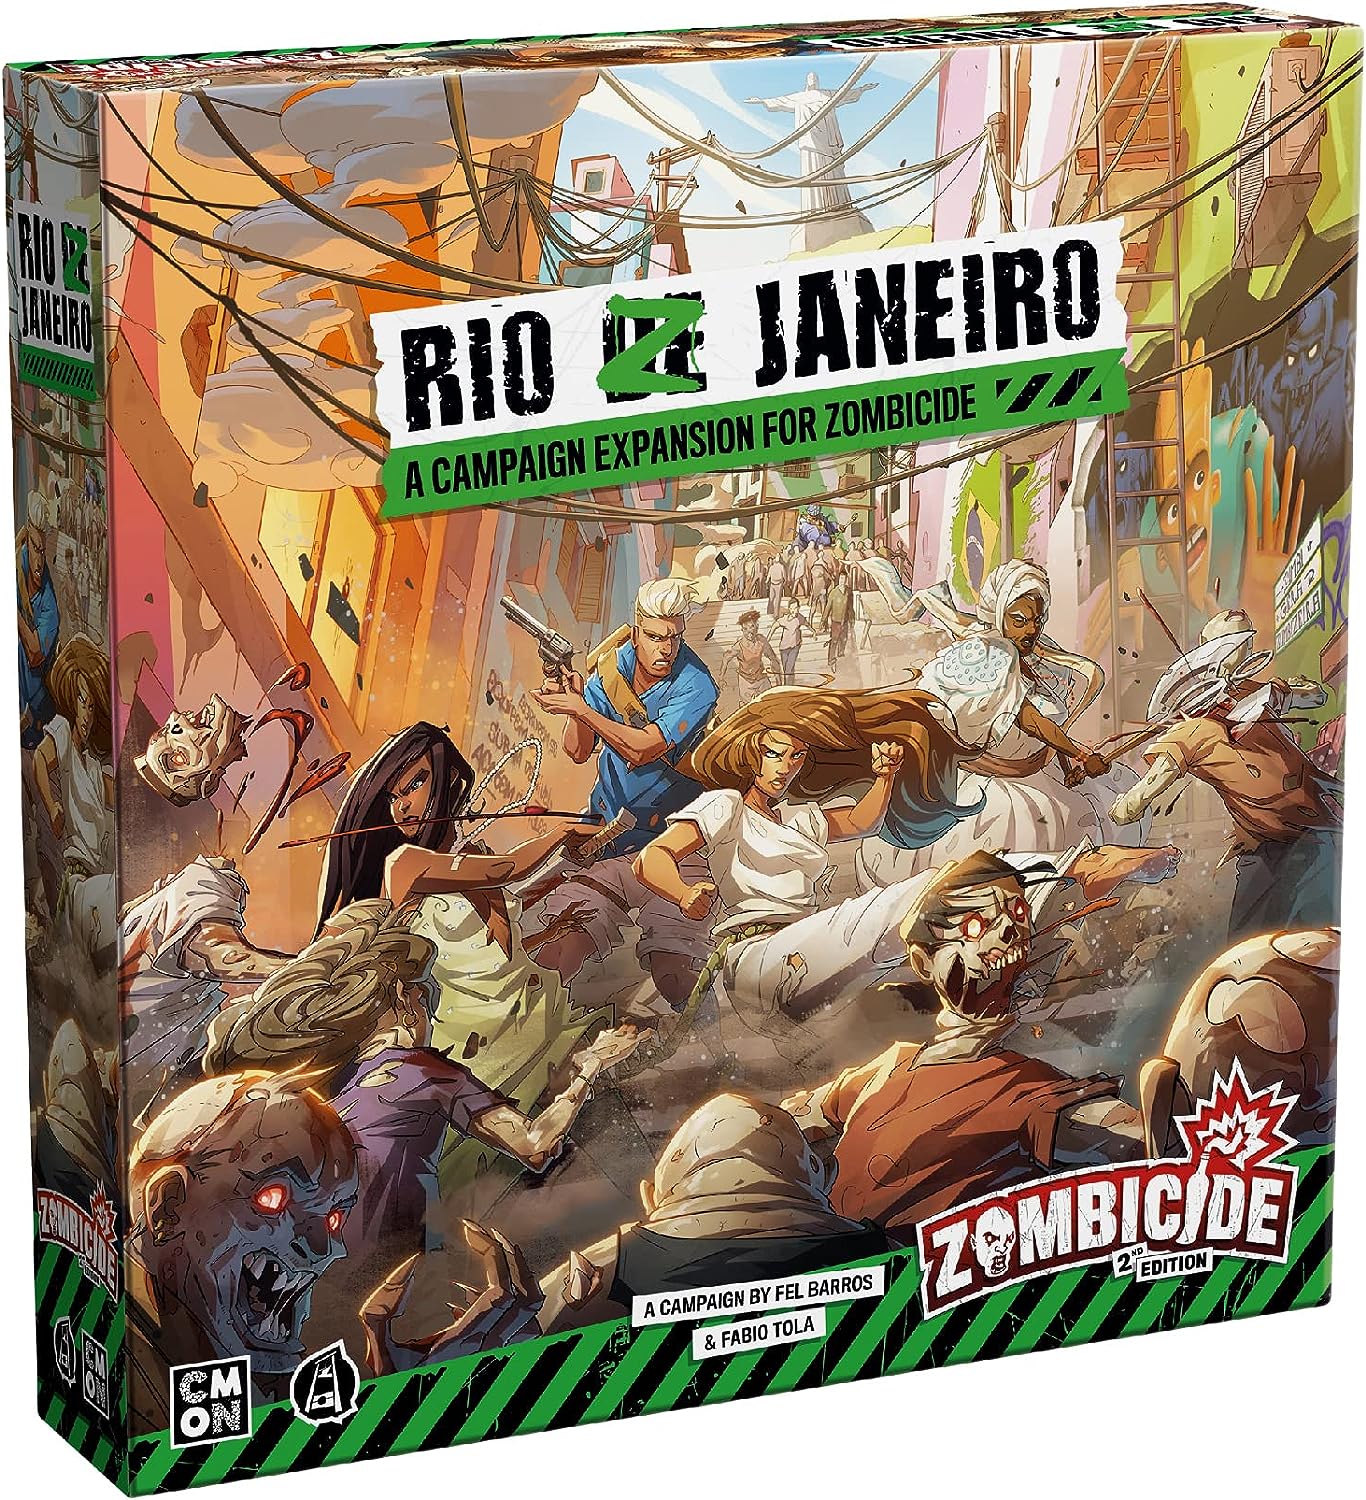 Cool Mini Or Not Zombicide: 2nd Edition – Rio Z Janeiro - EN